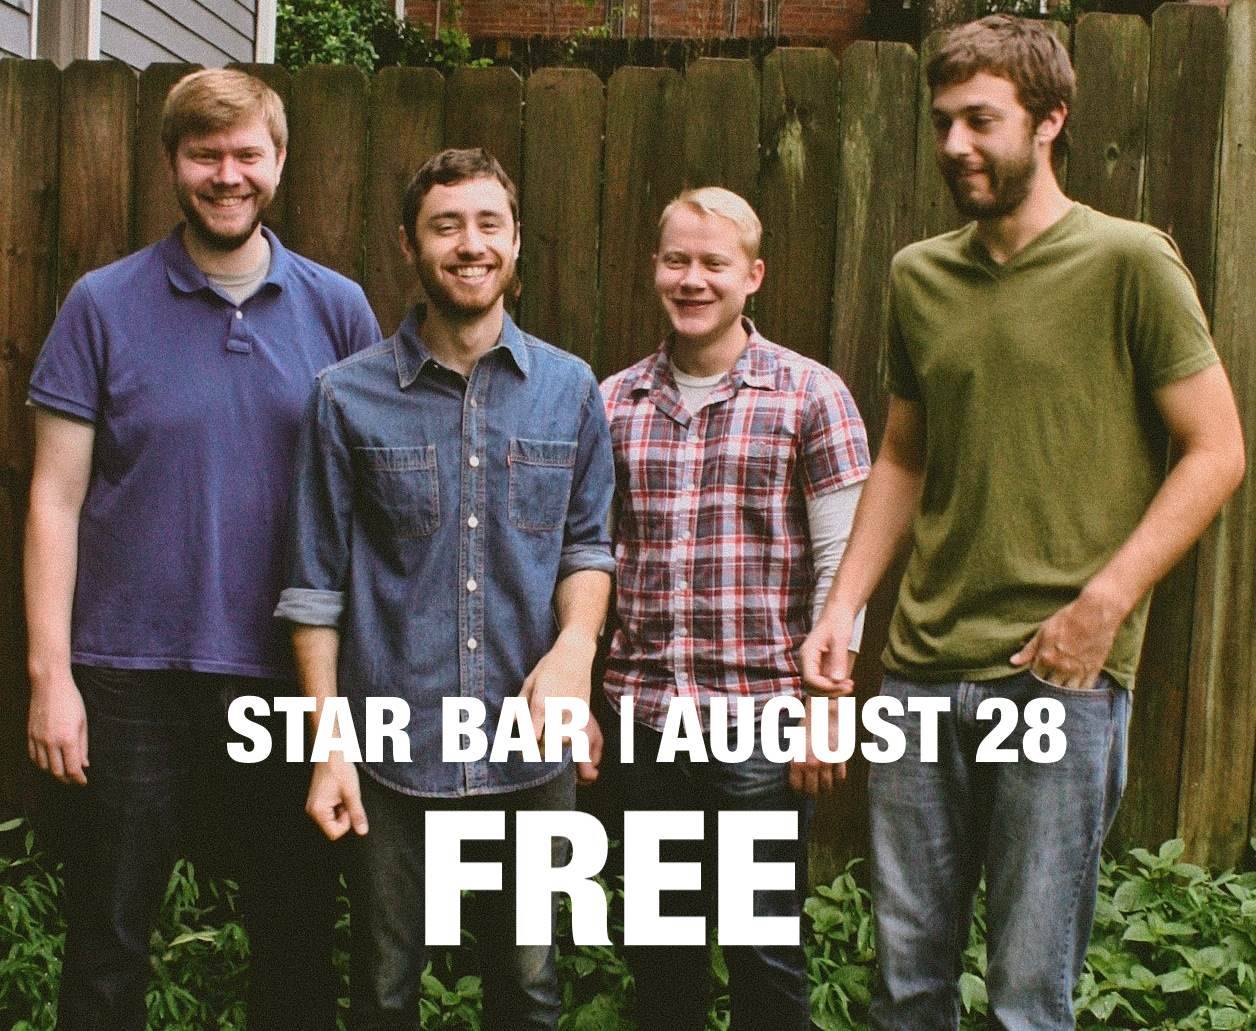 FREE SHOW | August 28th at The Star Community Bar | w/ Joe Smith and the Going Concern, The Greater Vavoom
TICKETS: free entry at the door!